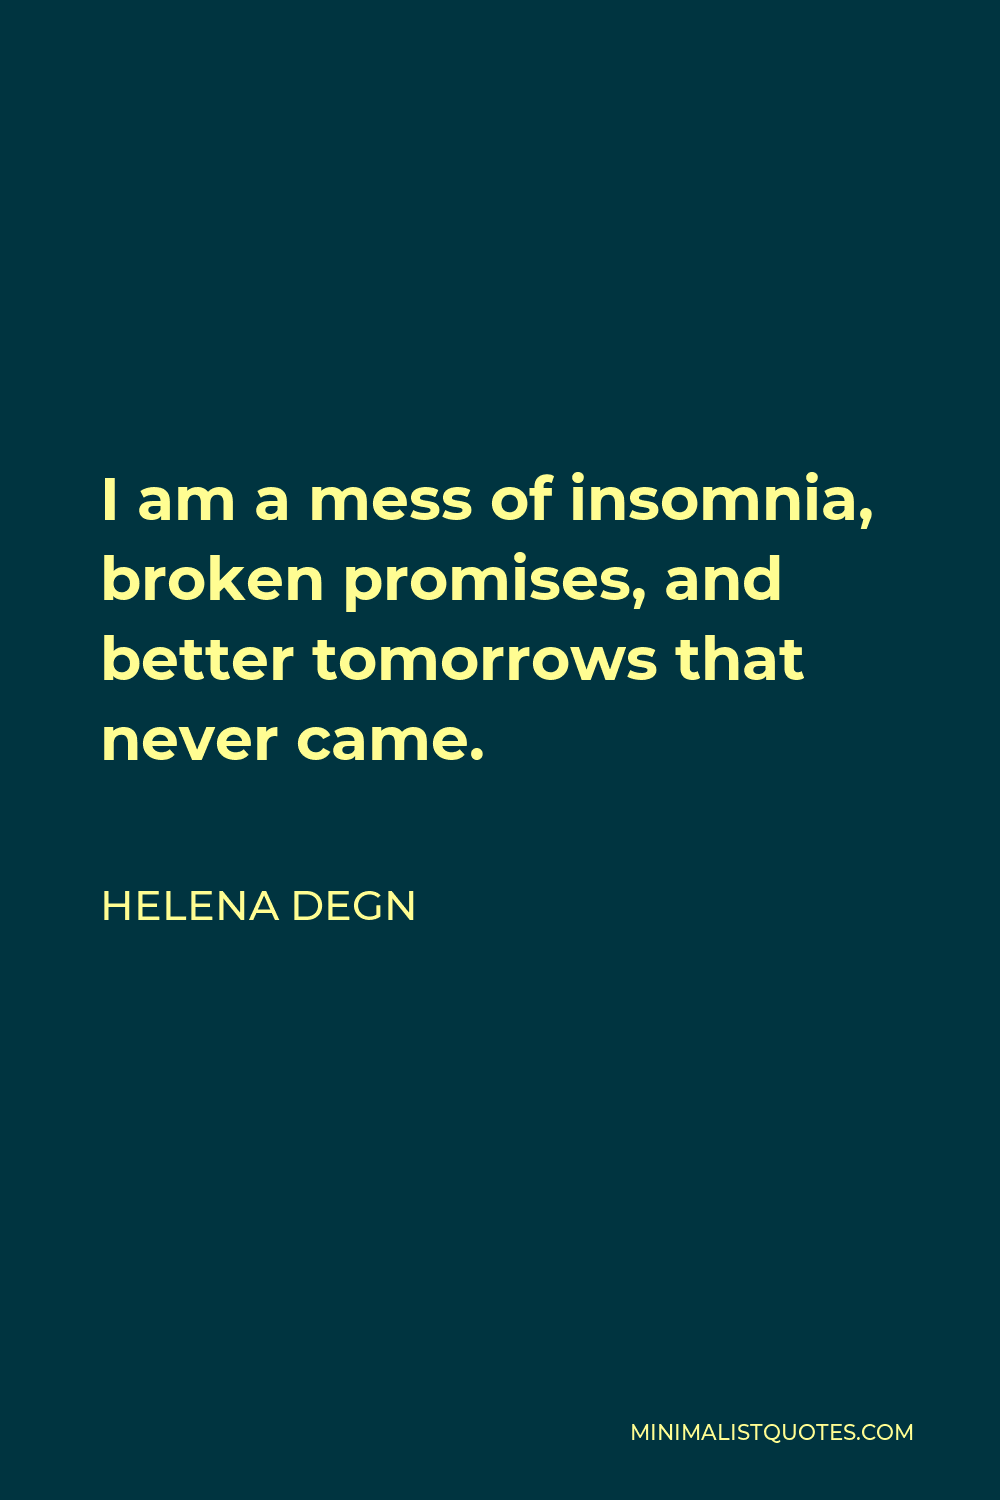 Helena Degn Quote - I am a mess of insomnia, broken promises, and better tomorrows that never came.